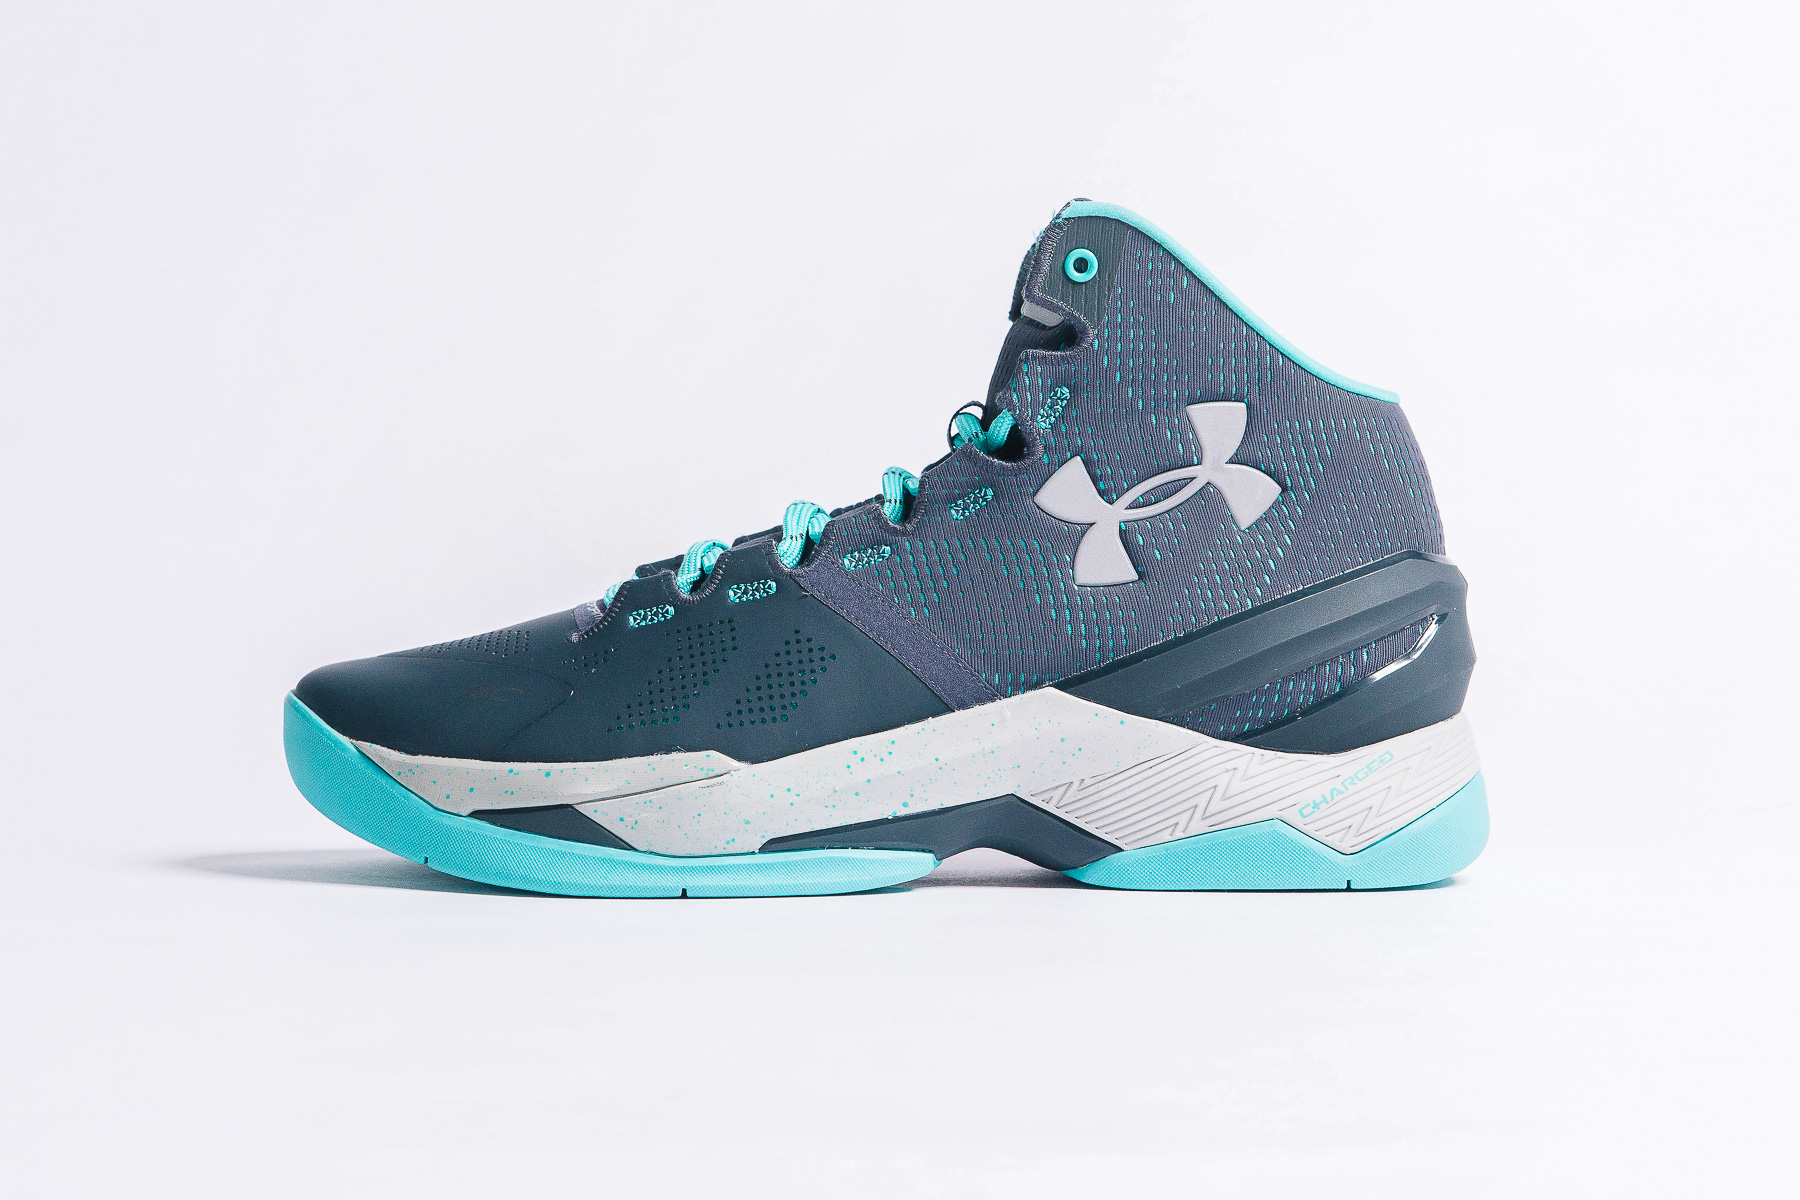 Under Armour Curry 2 Rainmaker